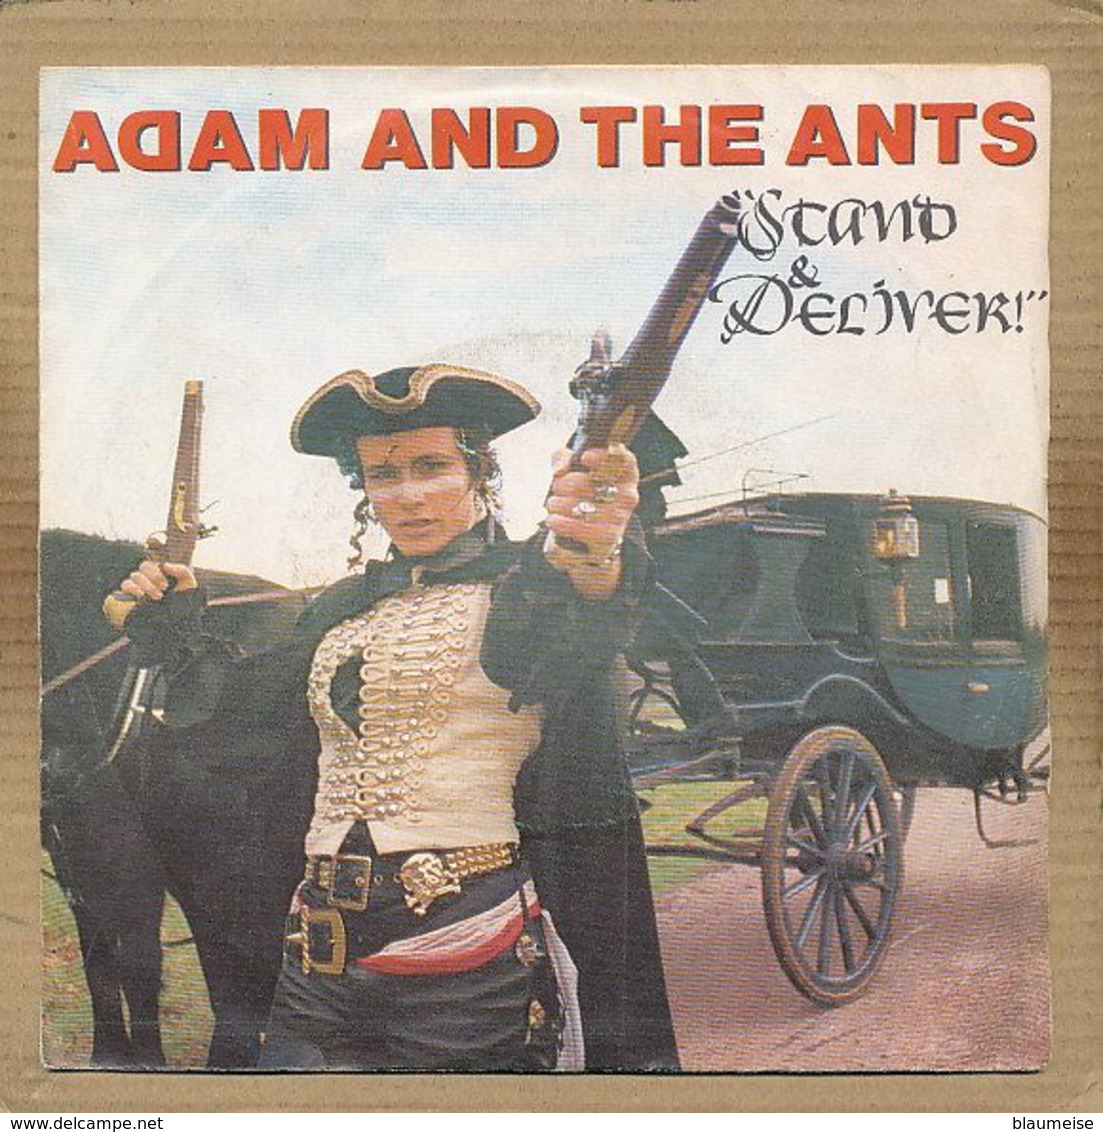 7" Single, Adam And The Ants - Stand And Deliver - Disco, Pop